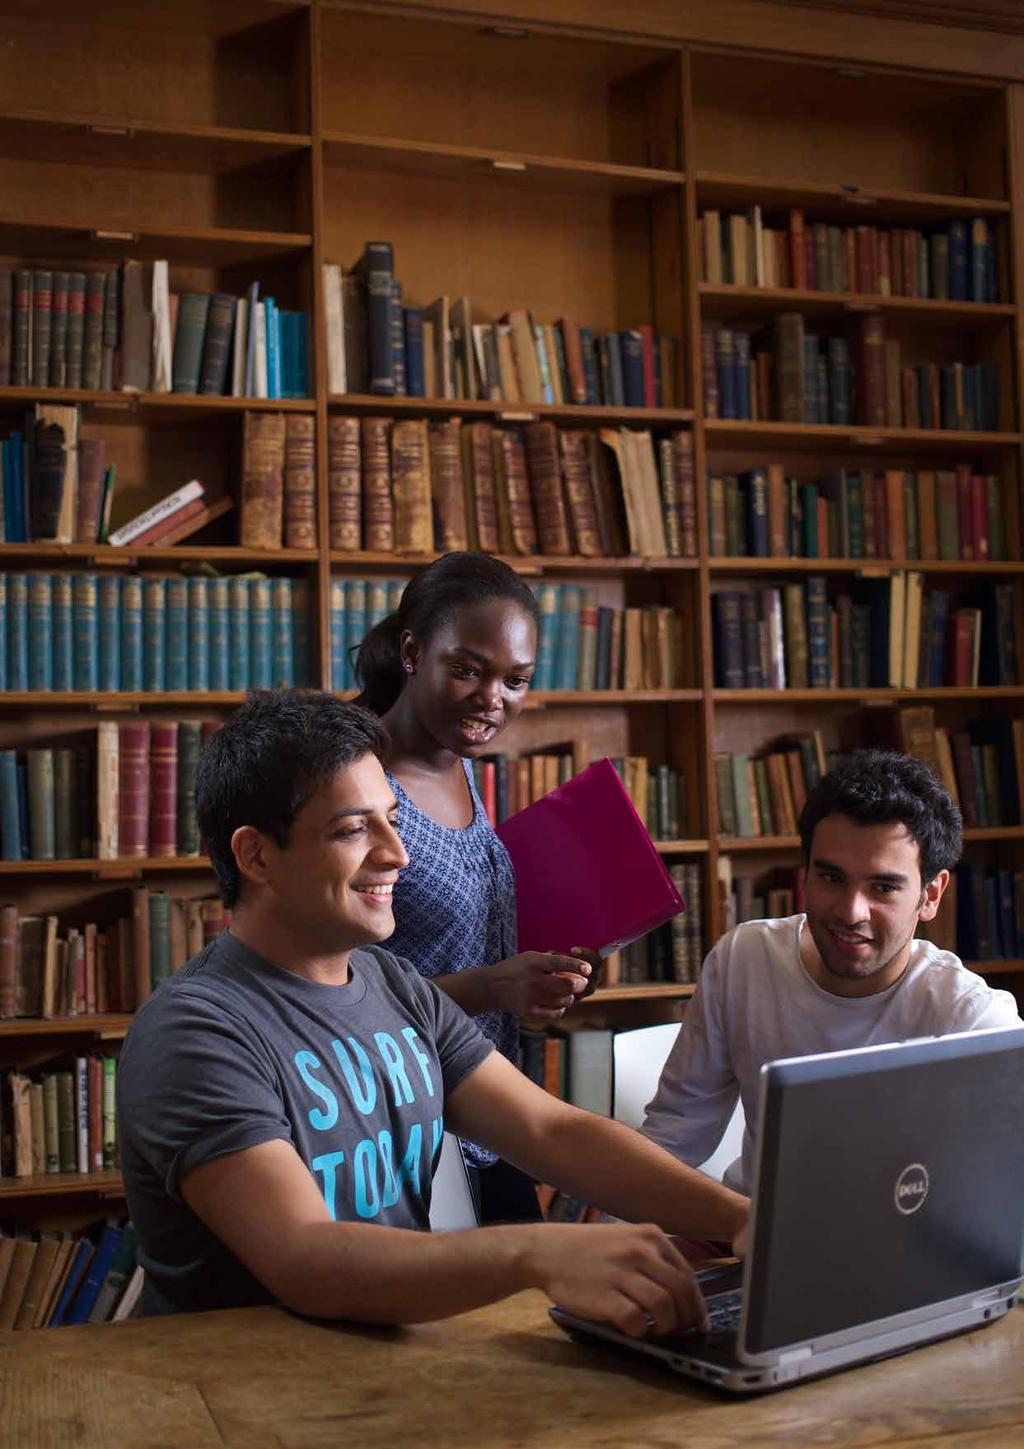 INTERNATIONAL REQUIREMENTS The University of Exeter warmly welcomes international students and we try our best to provide all the support you may need during your stay in the UK.